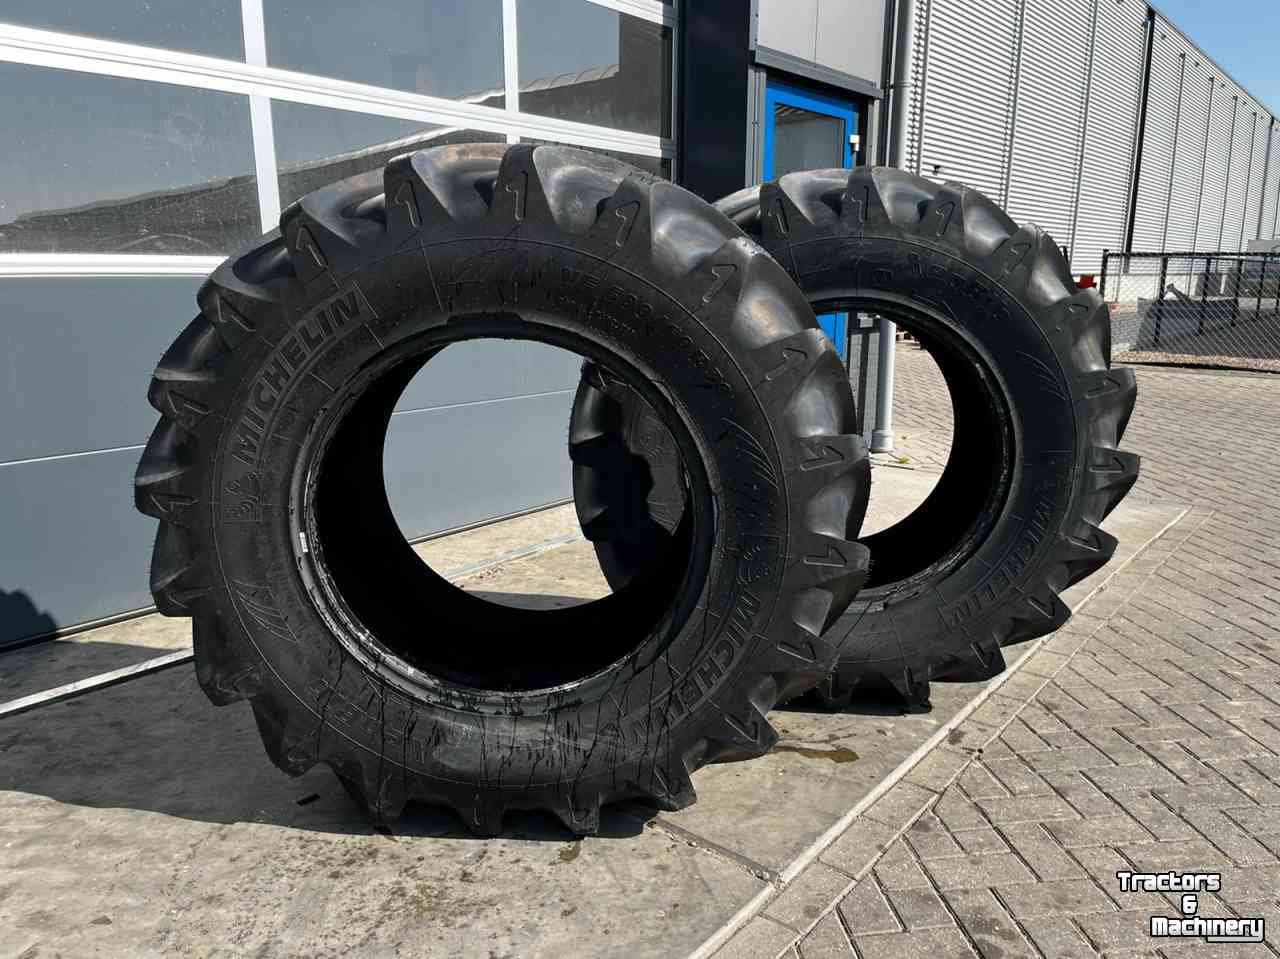 Wheels, Tyres, Rims & Dual spacers Michelin 710/60 R42